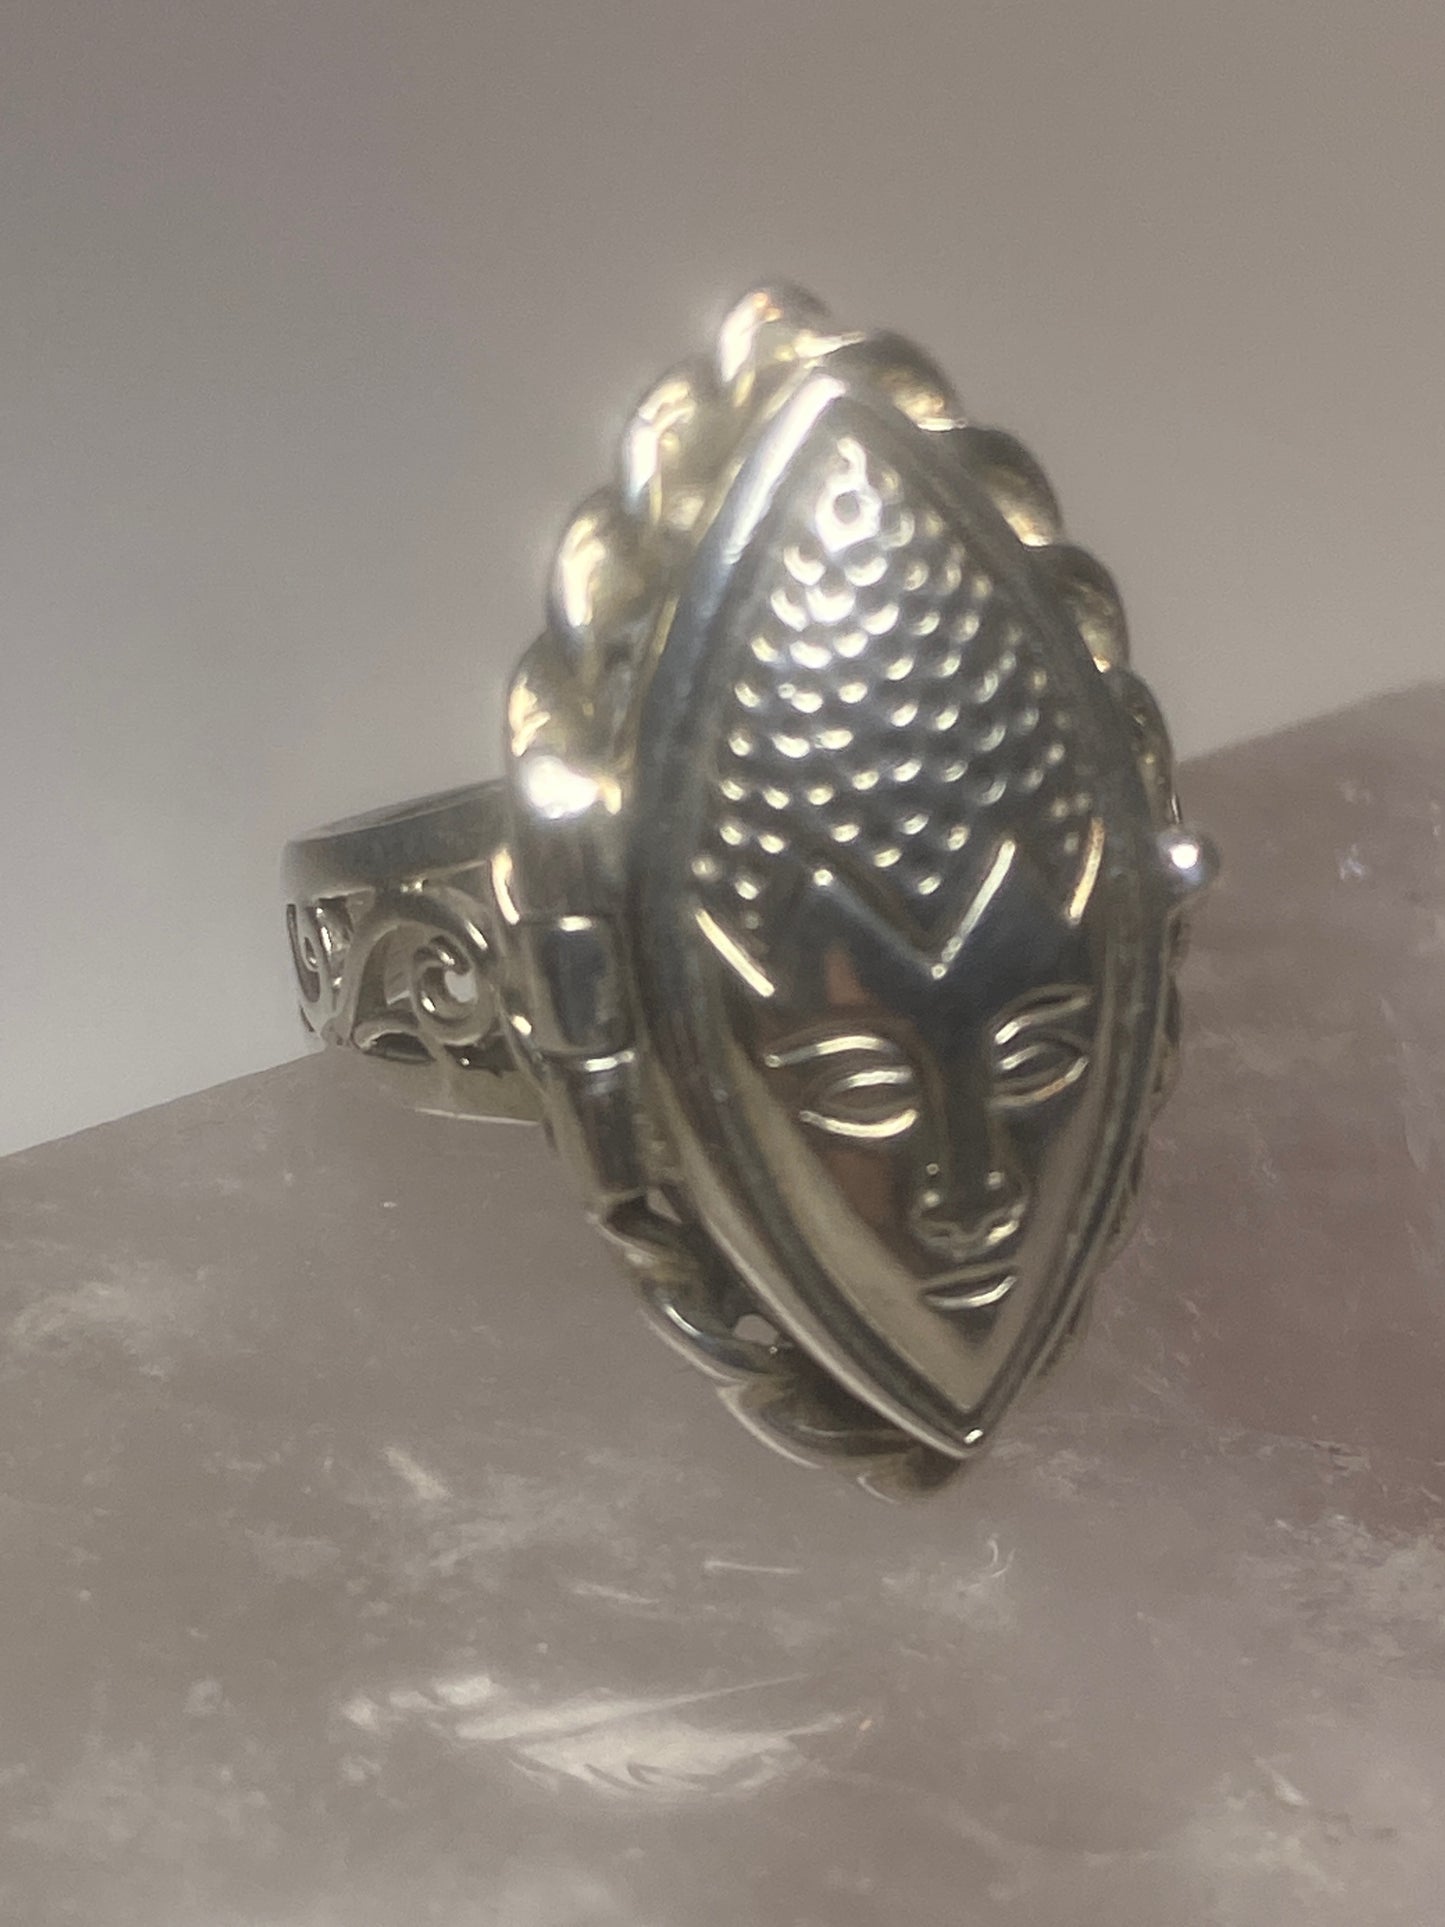 Poison ring long face band sterling silver women girls